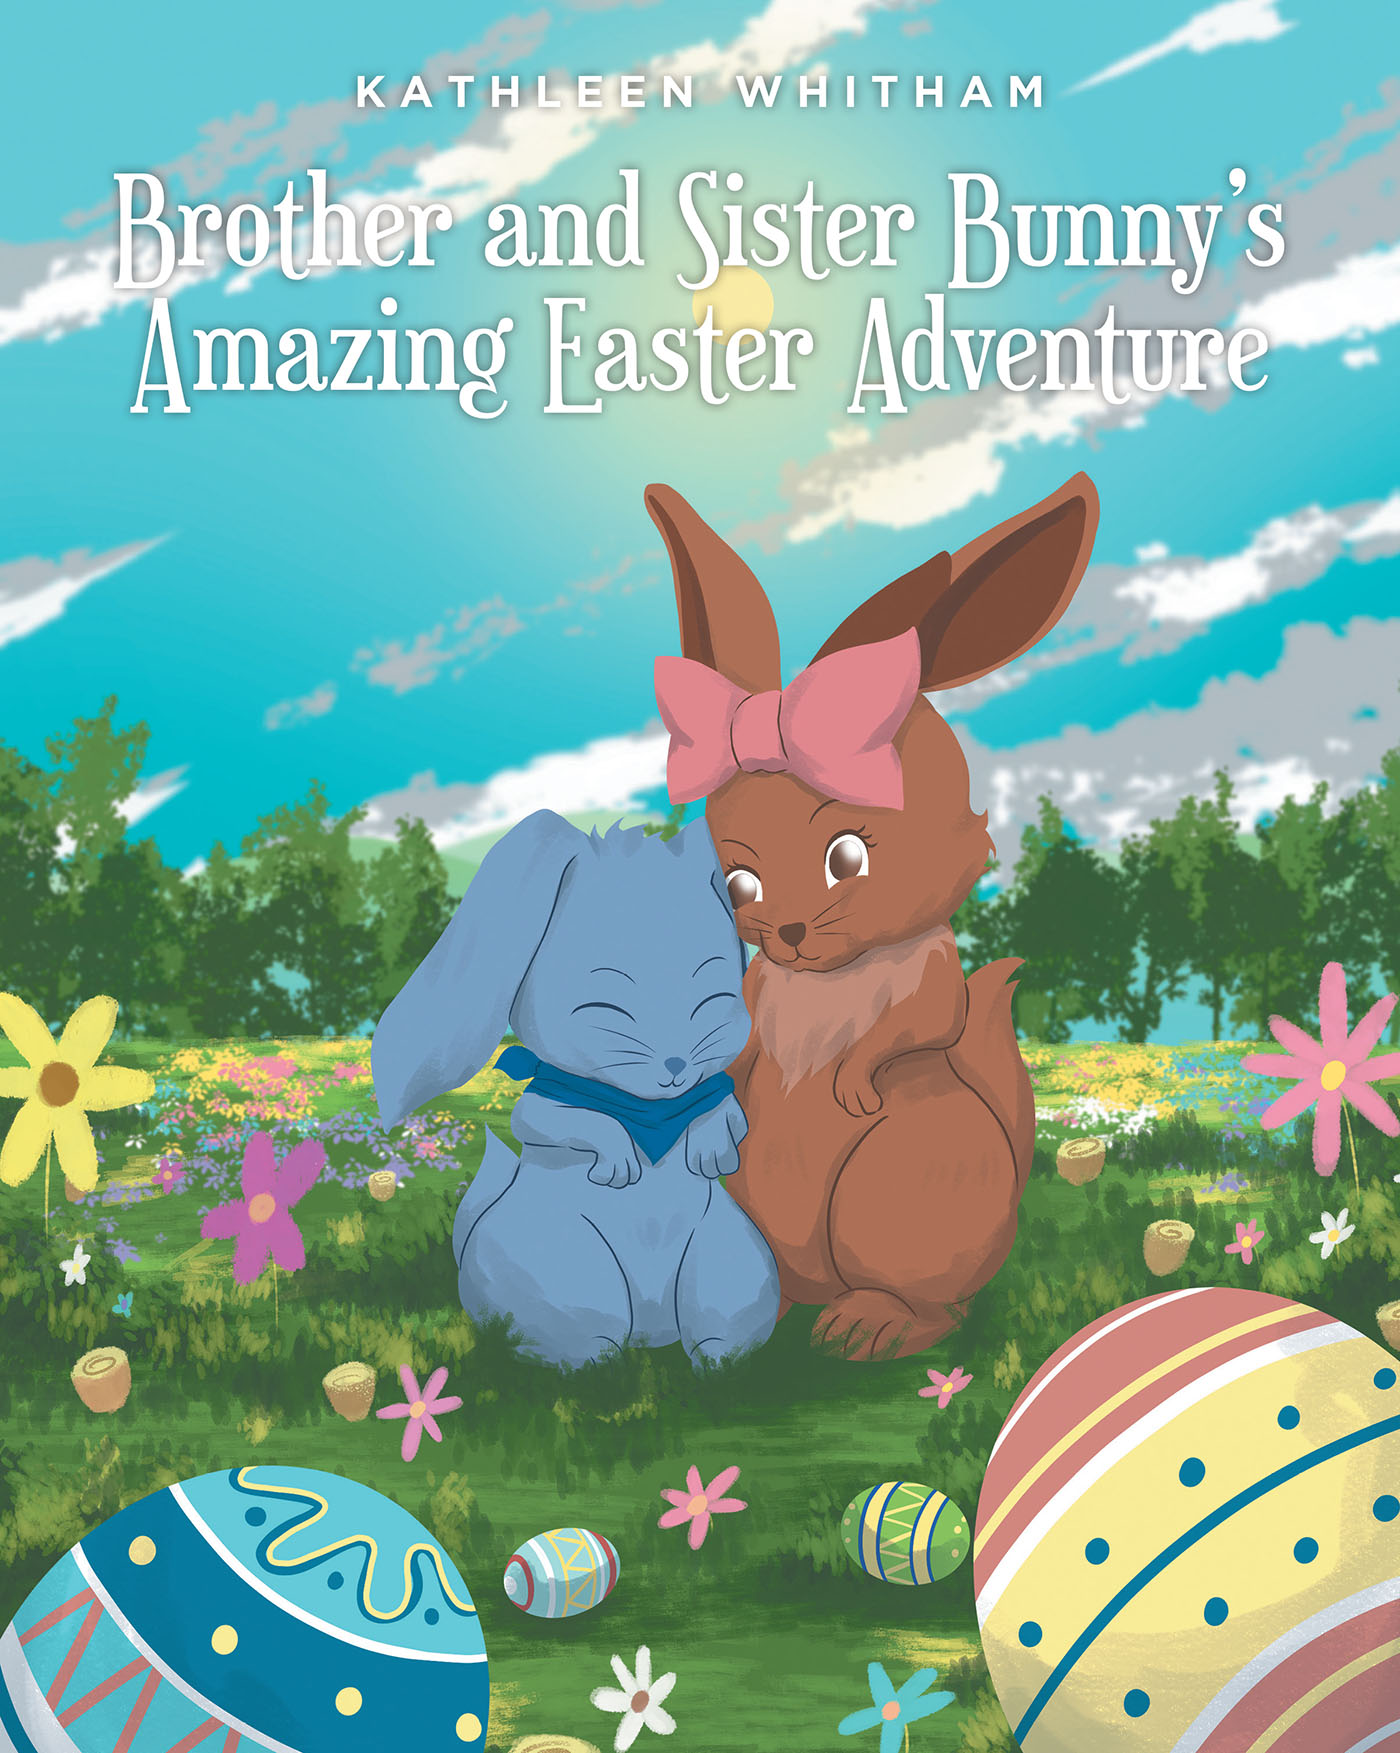 Kathleen Whitham’s New Book "Brother and Sister Bunny's Amazing Easter Adventure" Follows Two Bunnies Who Learn the True Meaning of Easter from a Group of Famous Rabbits